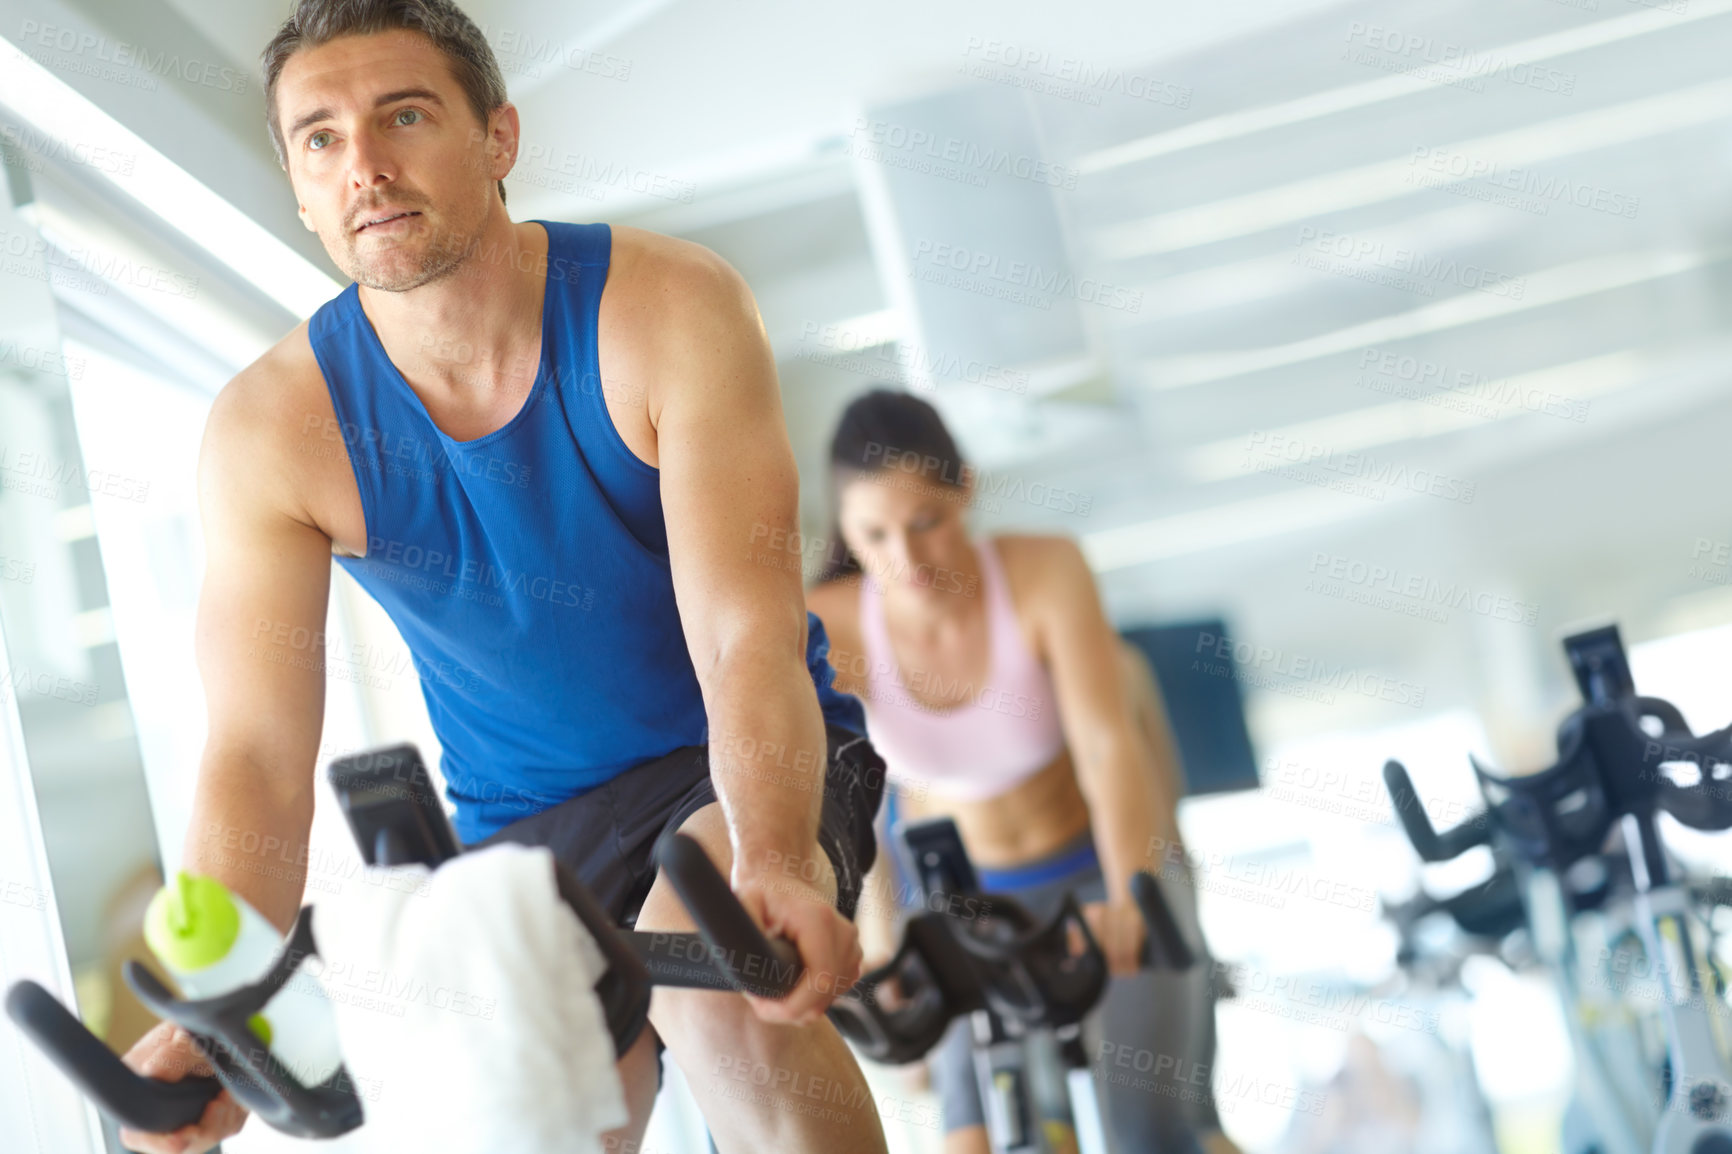 Buy stock photo A man and woman exercising in spinning class at the gym